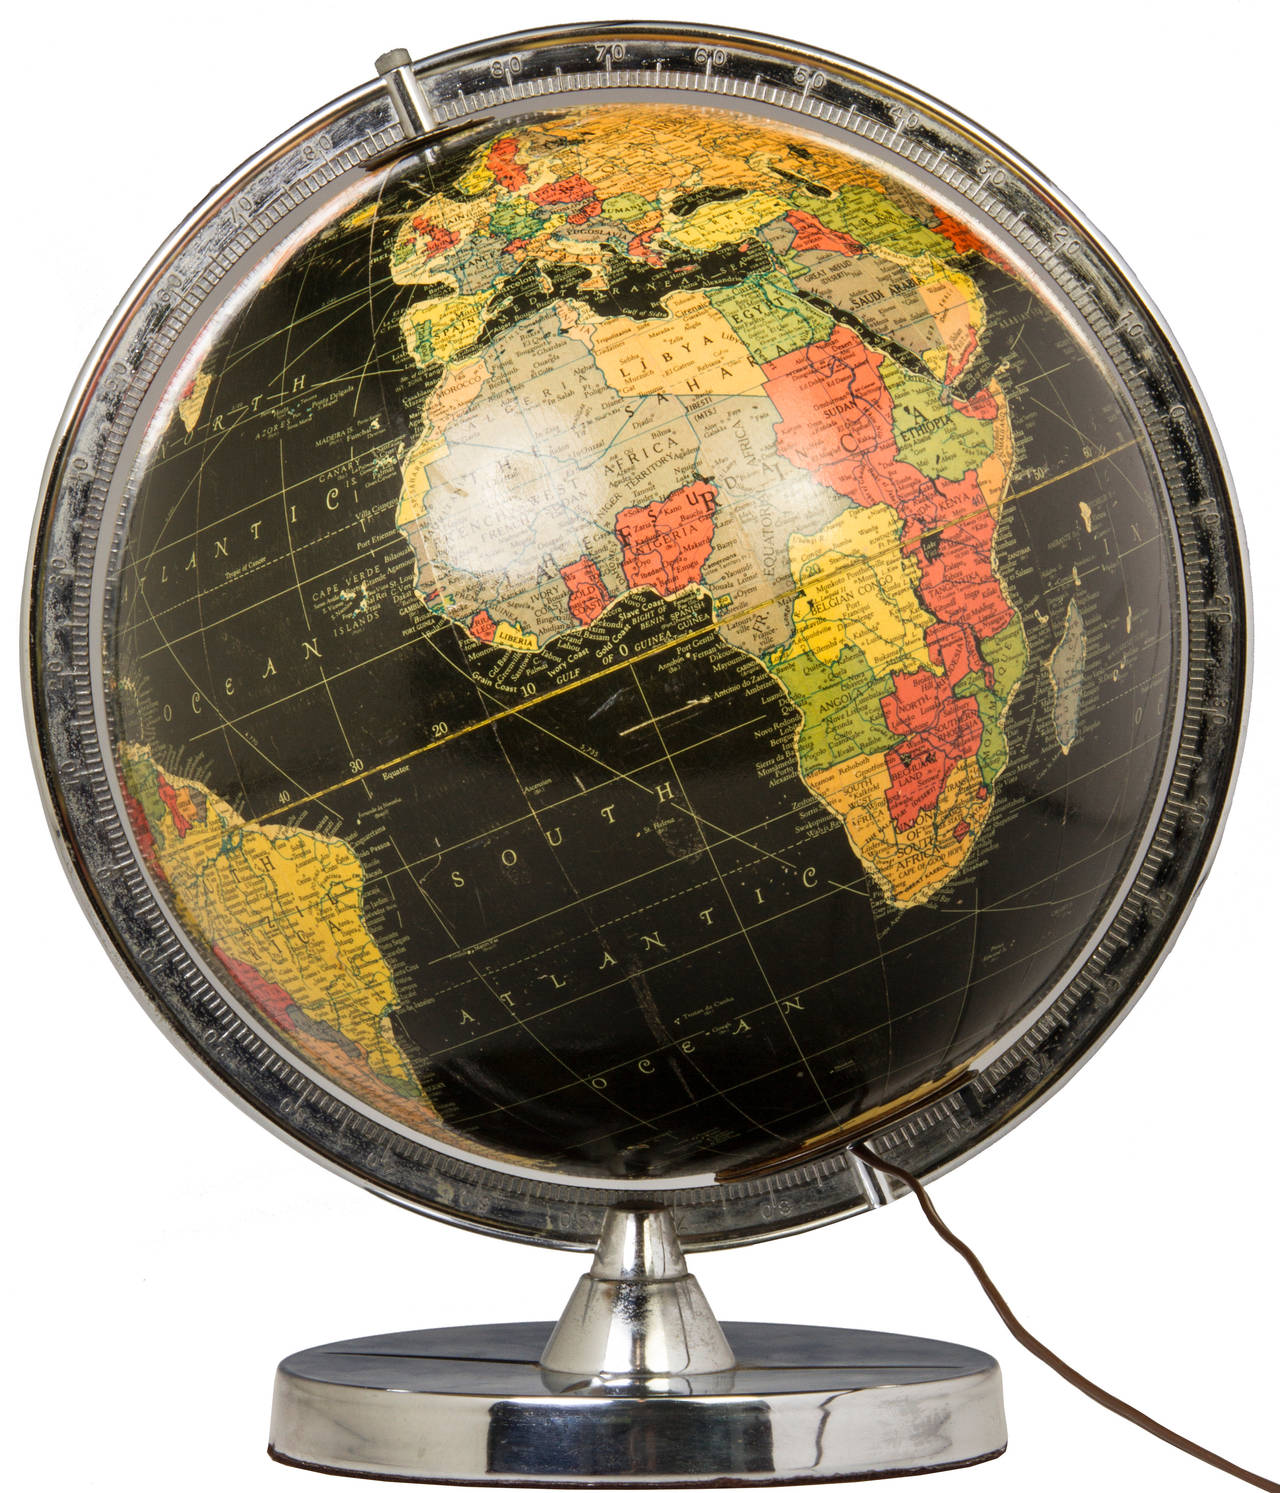 Great graphics on this globe.